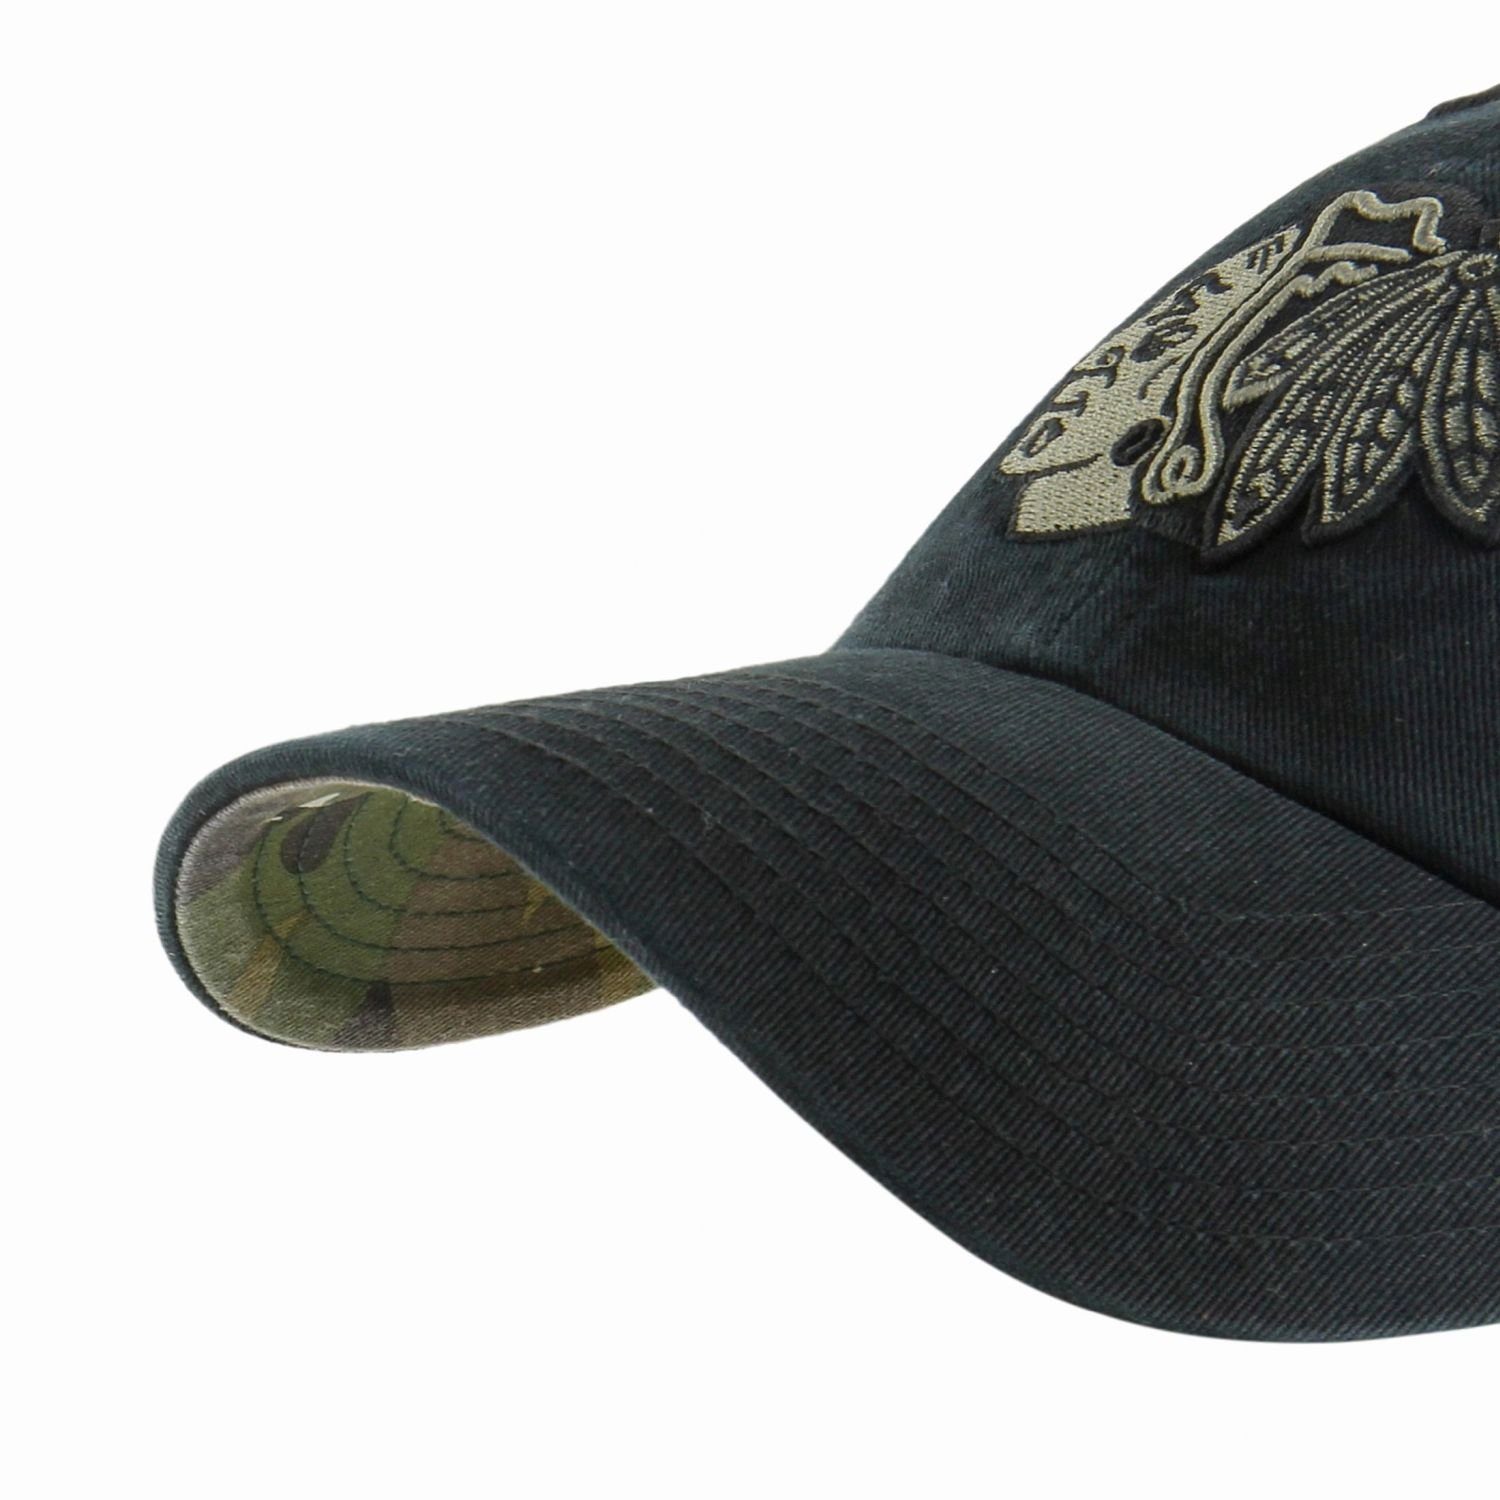 Cap Trucker Brand Blackhawks CLEAN Relaxed UP '47 Fit Chicago